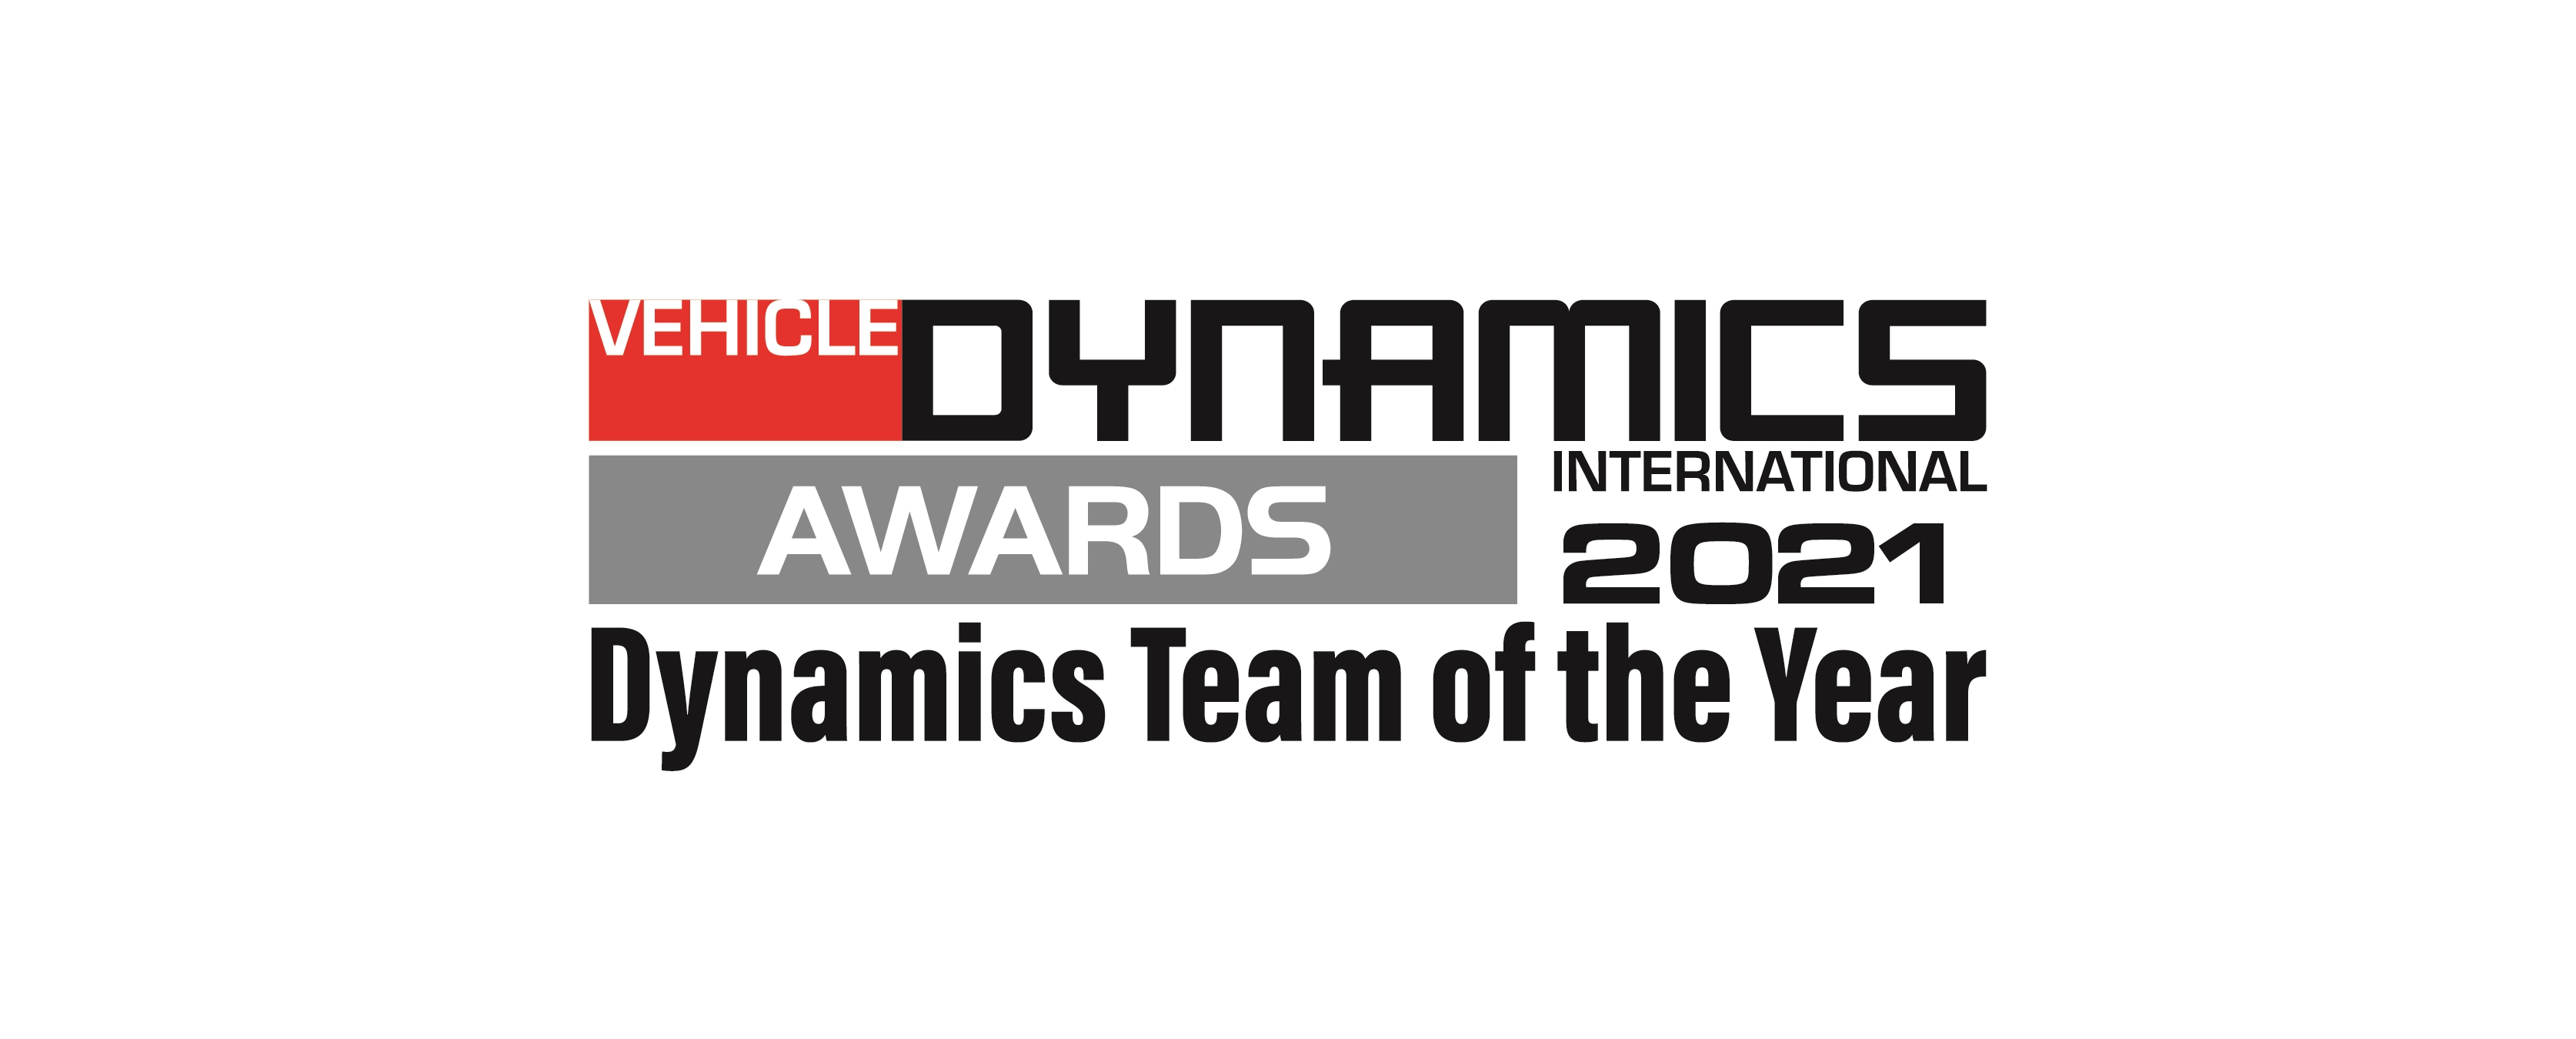 Dynamics Team of the Year